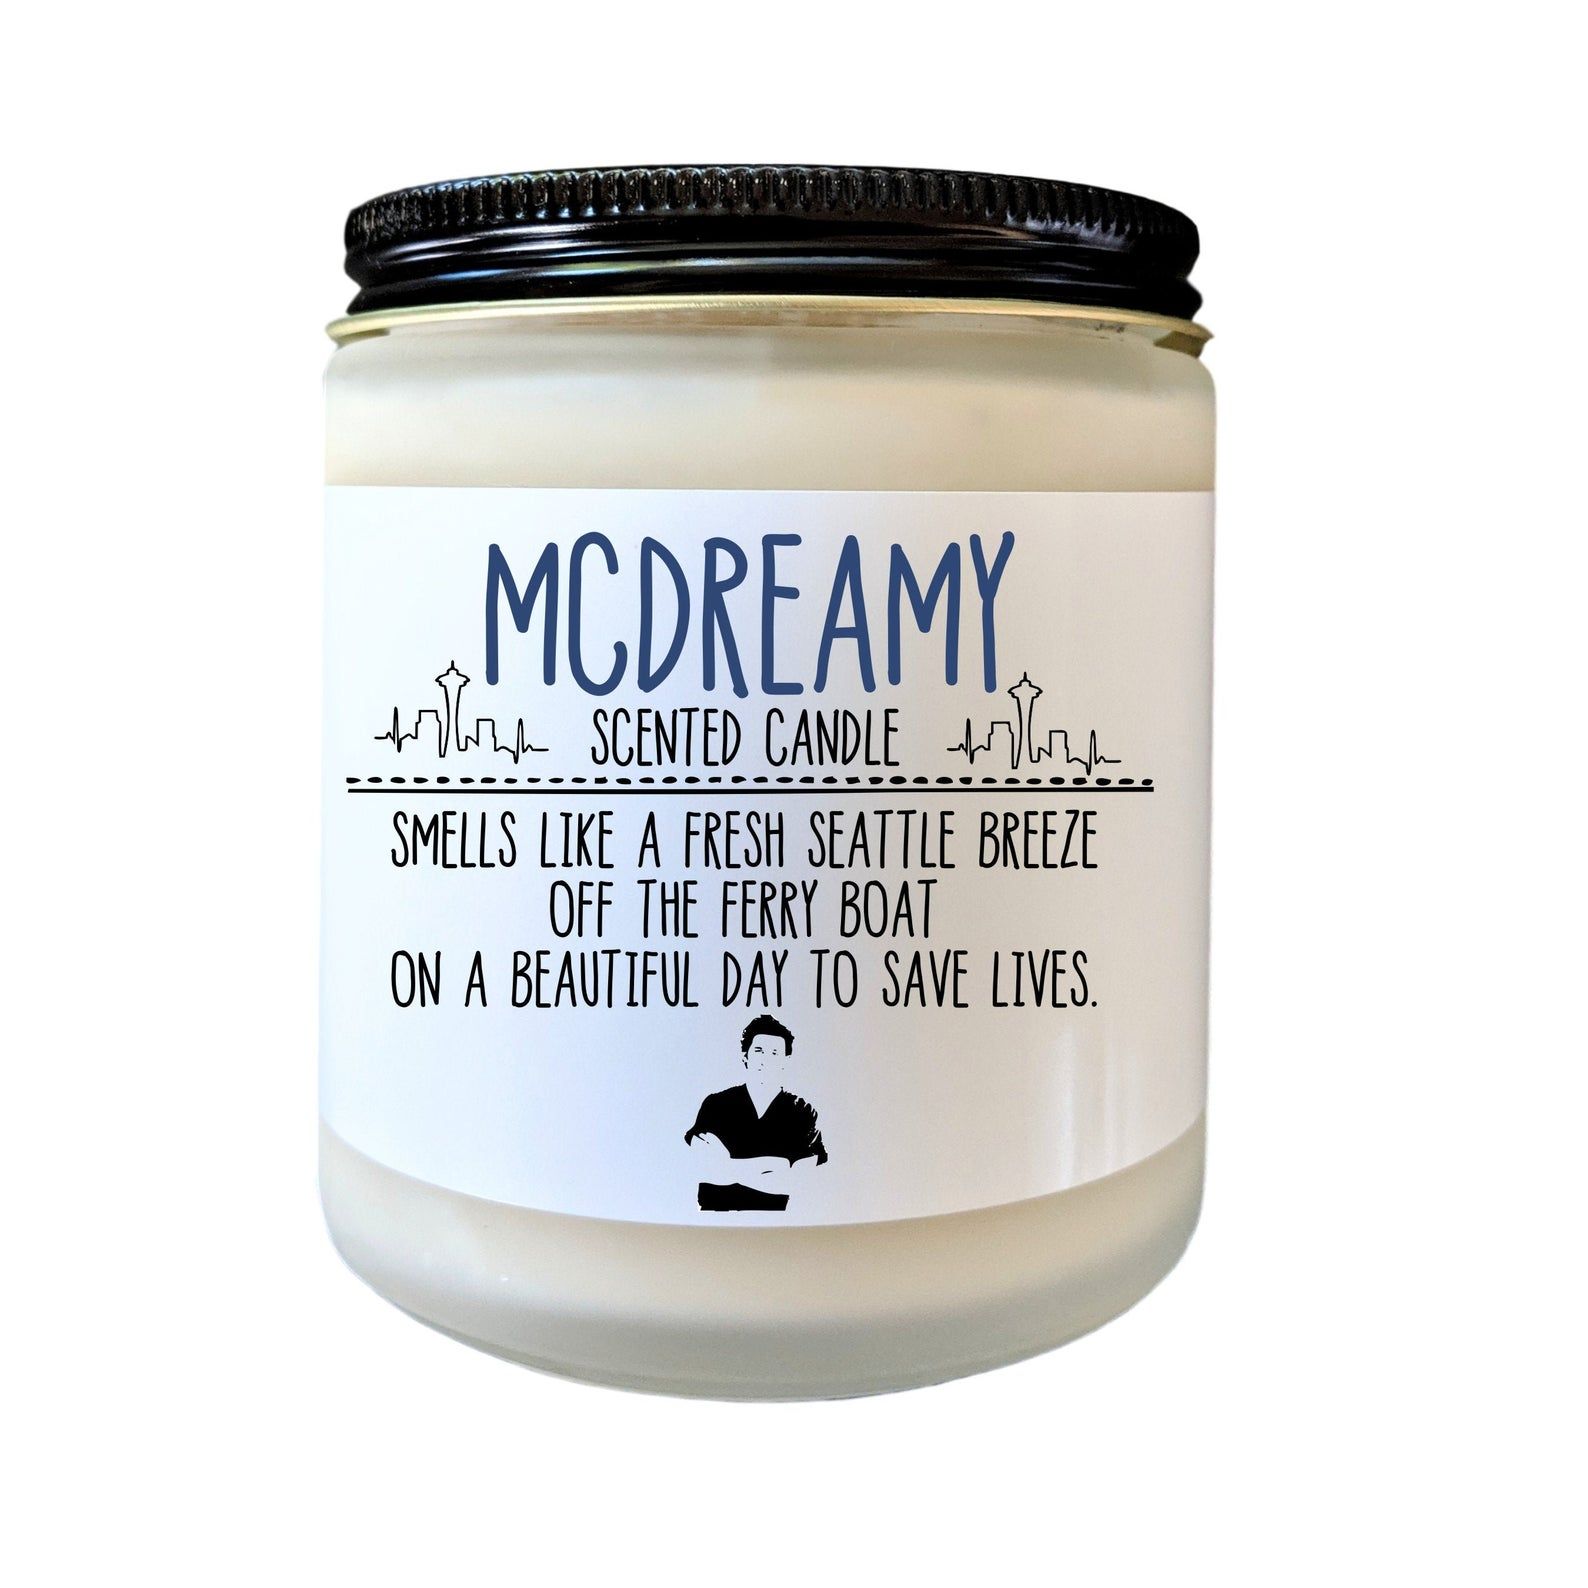 McDreamy Scented Candles Exist For The ‘Grey’s Anatomy’ Fan In Your Life